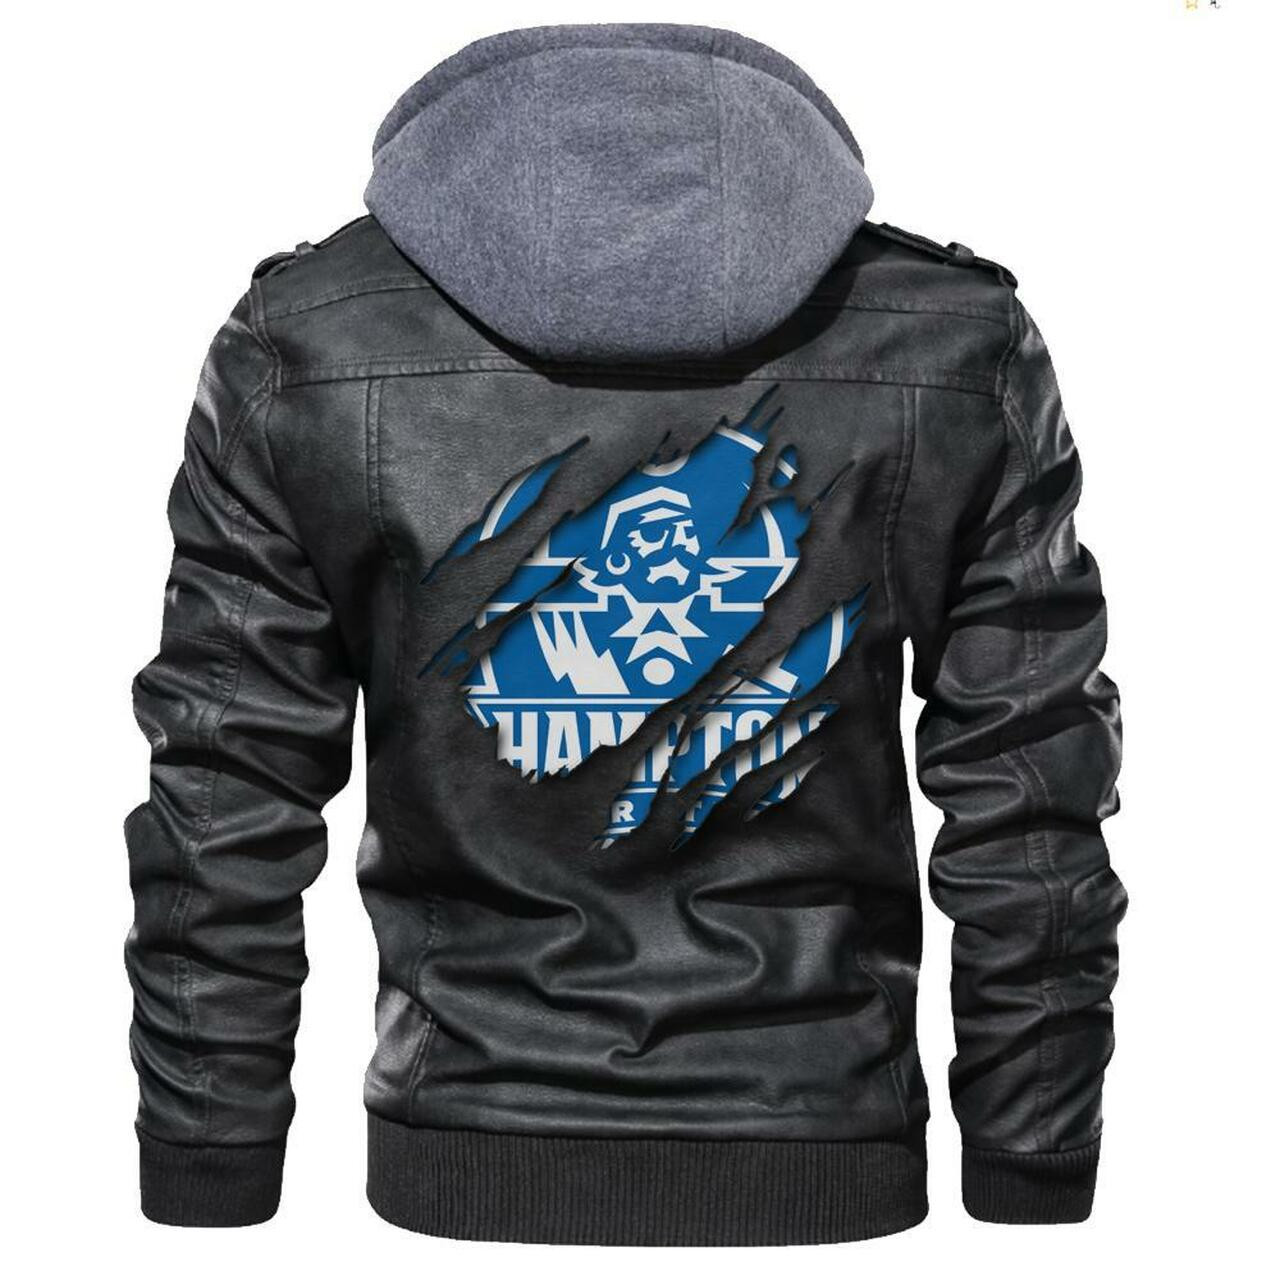 You can find a good leather jacket by access our website 51